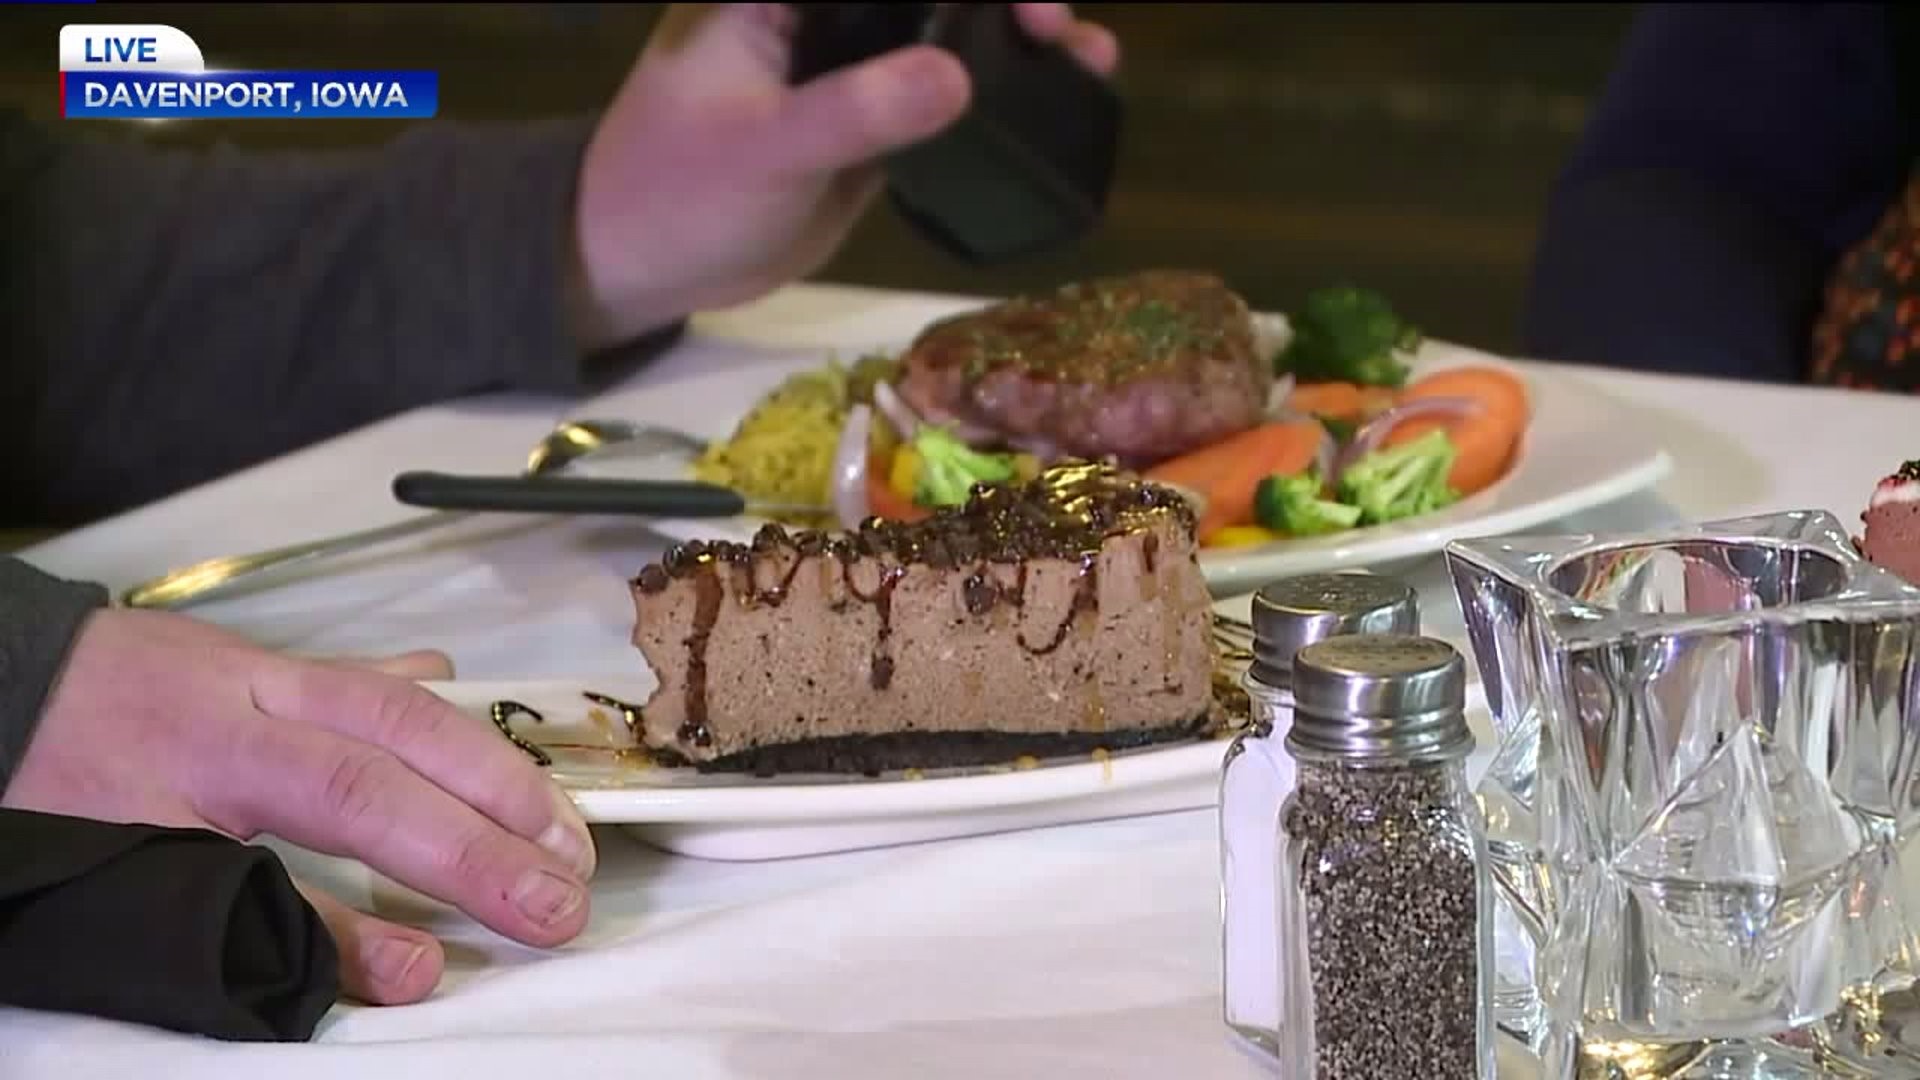 Quad Cities Restaurant Week at The Phoenix: A Delicious Meal and Dessert